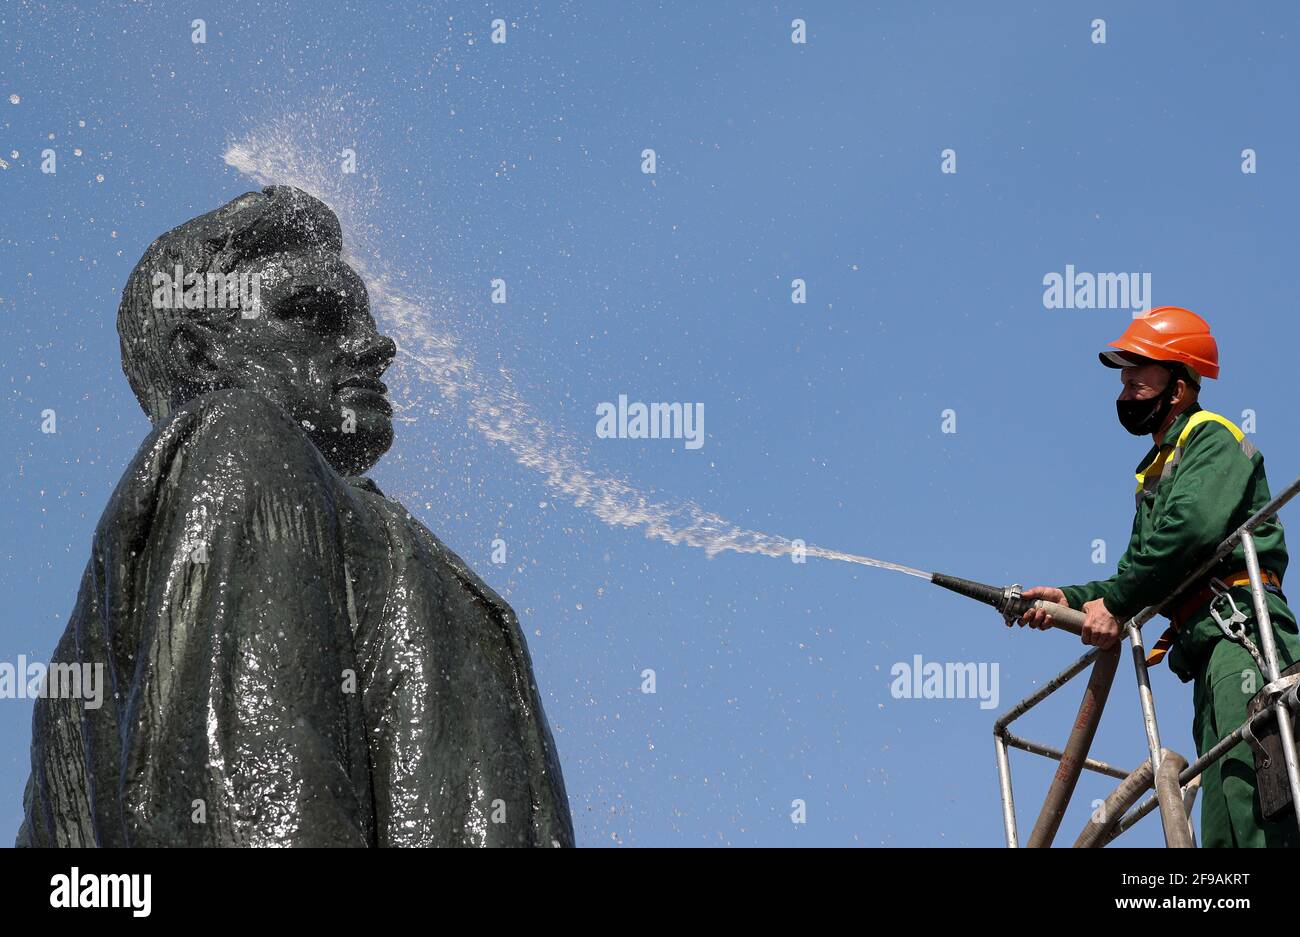 А municipal worker uses a pressure washer to clean a monument to Soviet poet Vladimir Mayakovsky in Moscow, Russia April 17, 2021.  REUTERS/Evgenia Novozhenina Stock Photo